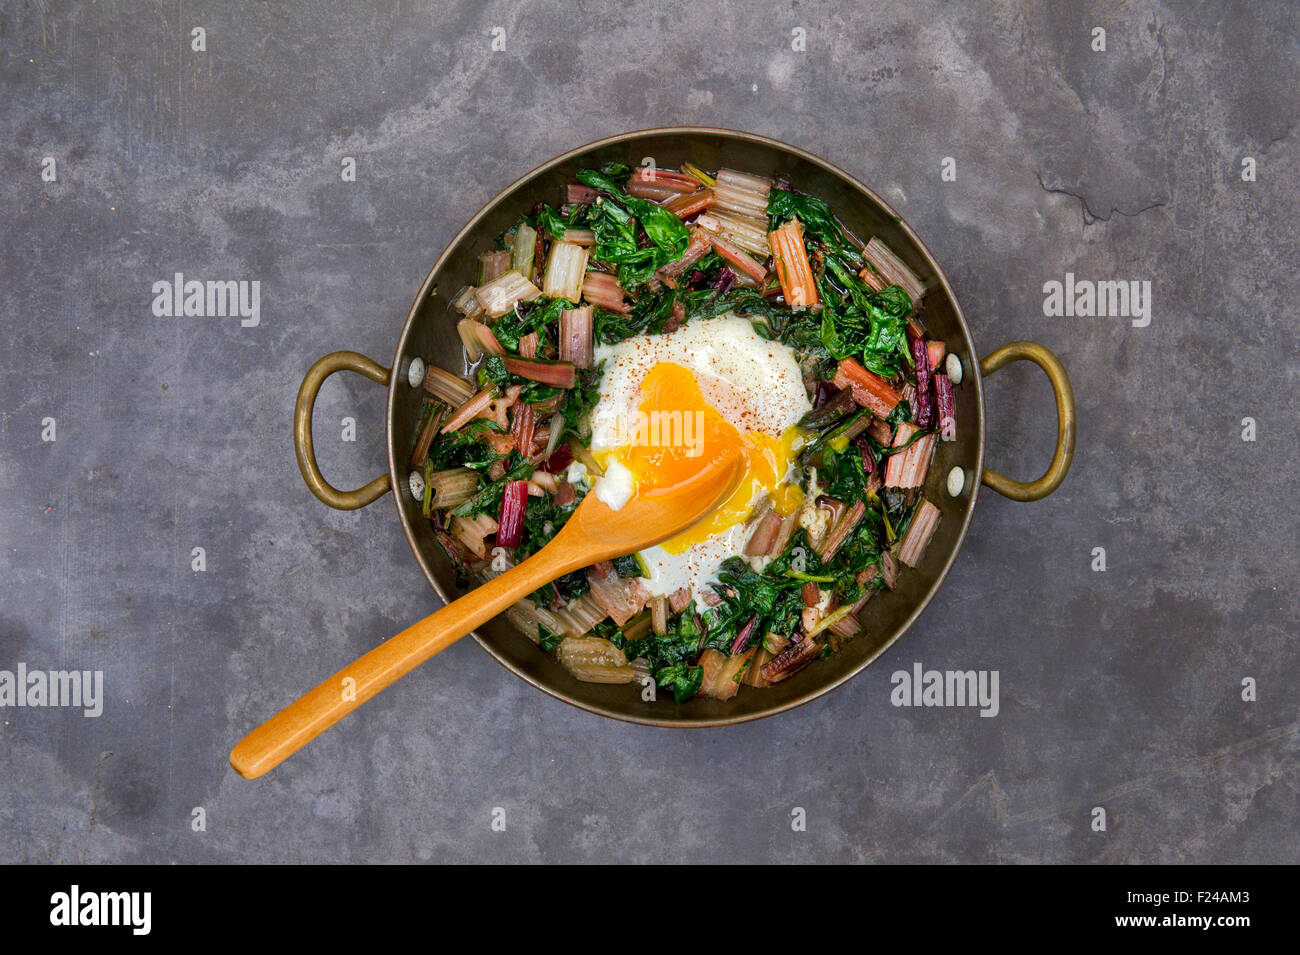 Paleo diet food, Swiss rainbow chard with a poached egg on top. This diet uses supposedly 'cave man' or Palaeolithic foods. a UK Stock Photo